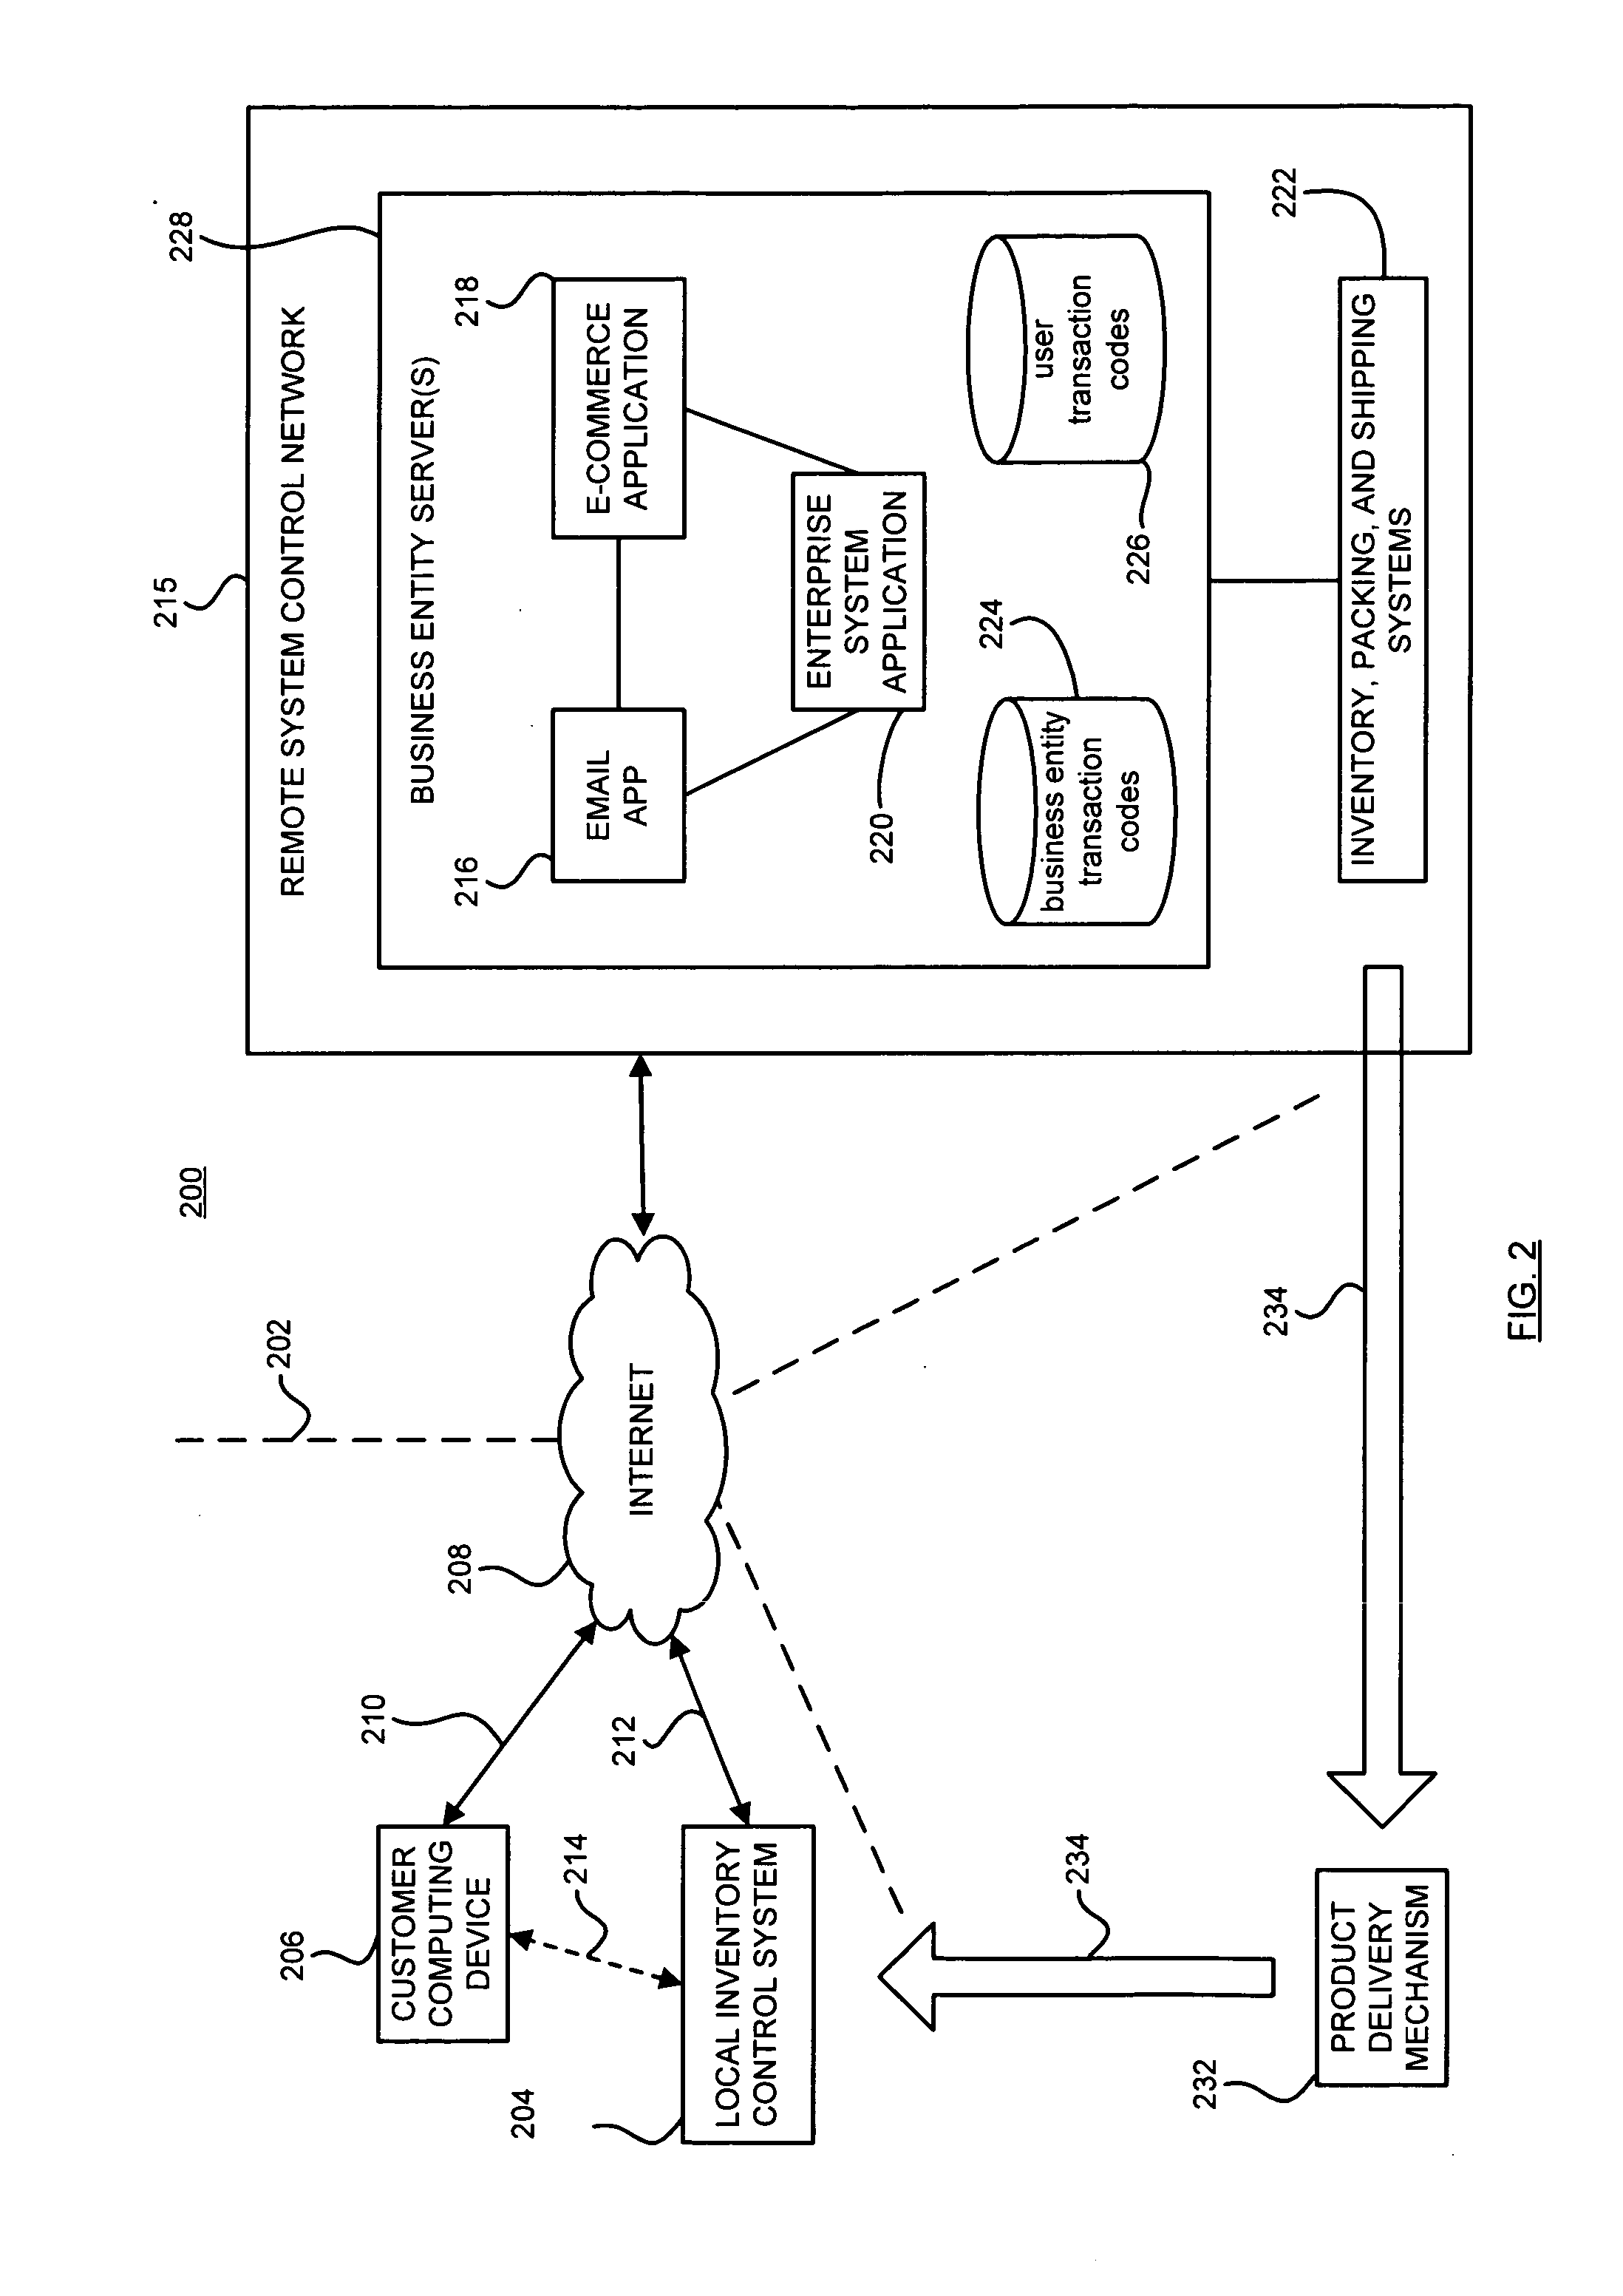 System and method for controlling access to a local inventory storage system via a remote e-commerce application